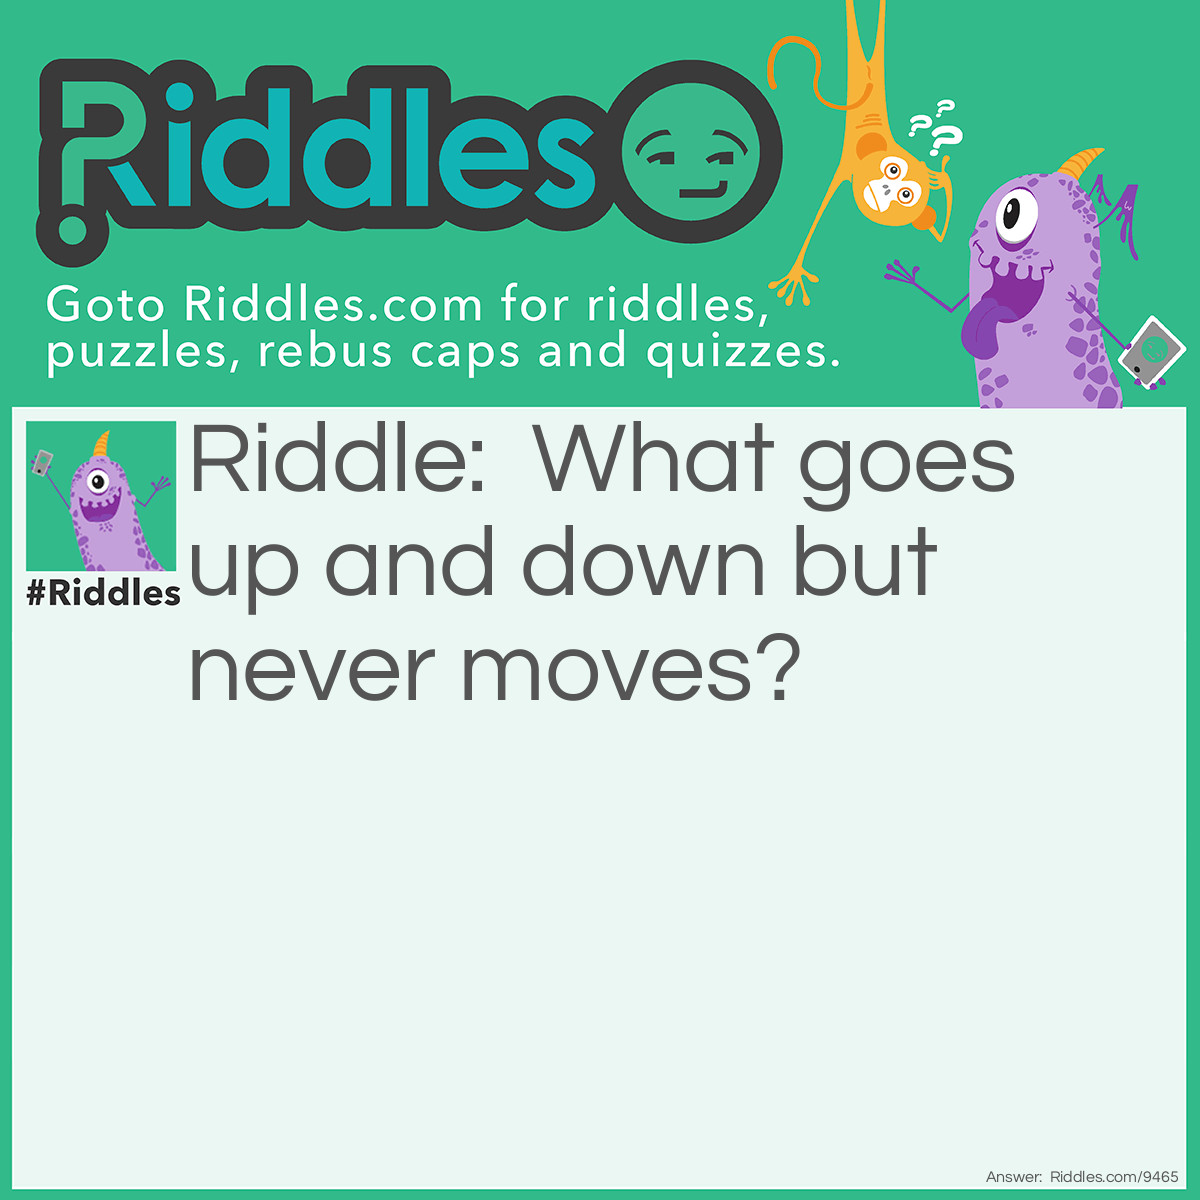 Riddle: What goes up and down but never moves? Answer: The temperature.